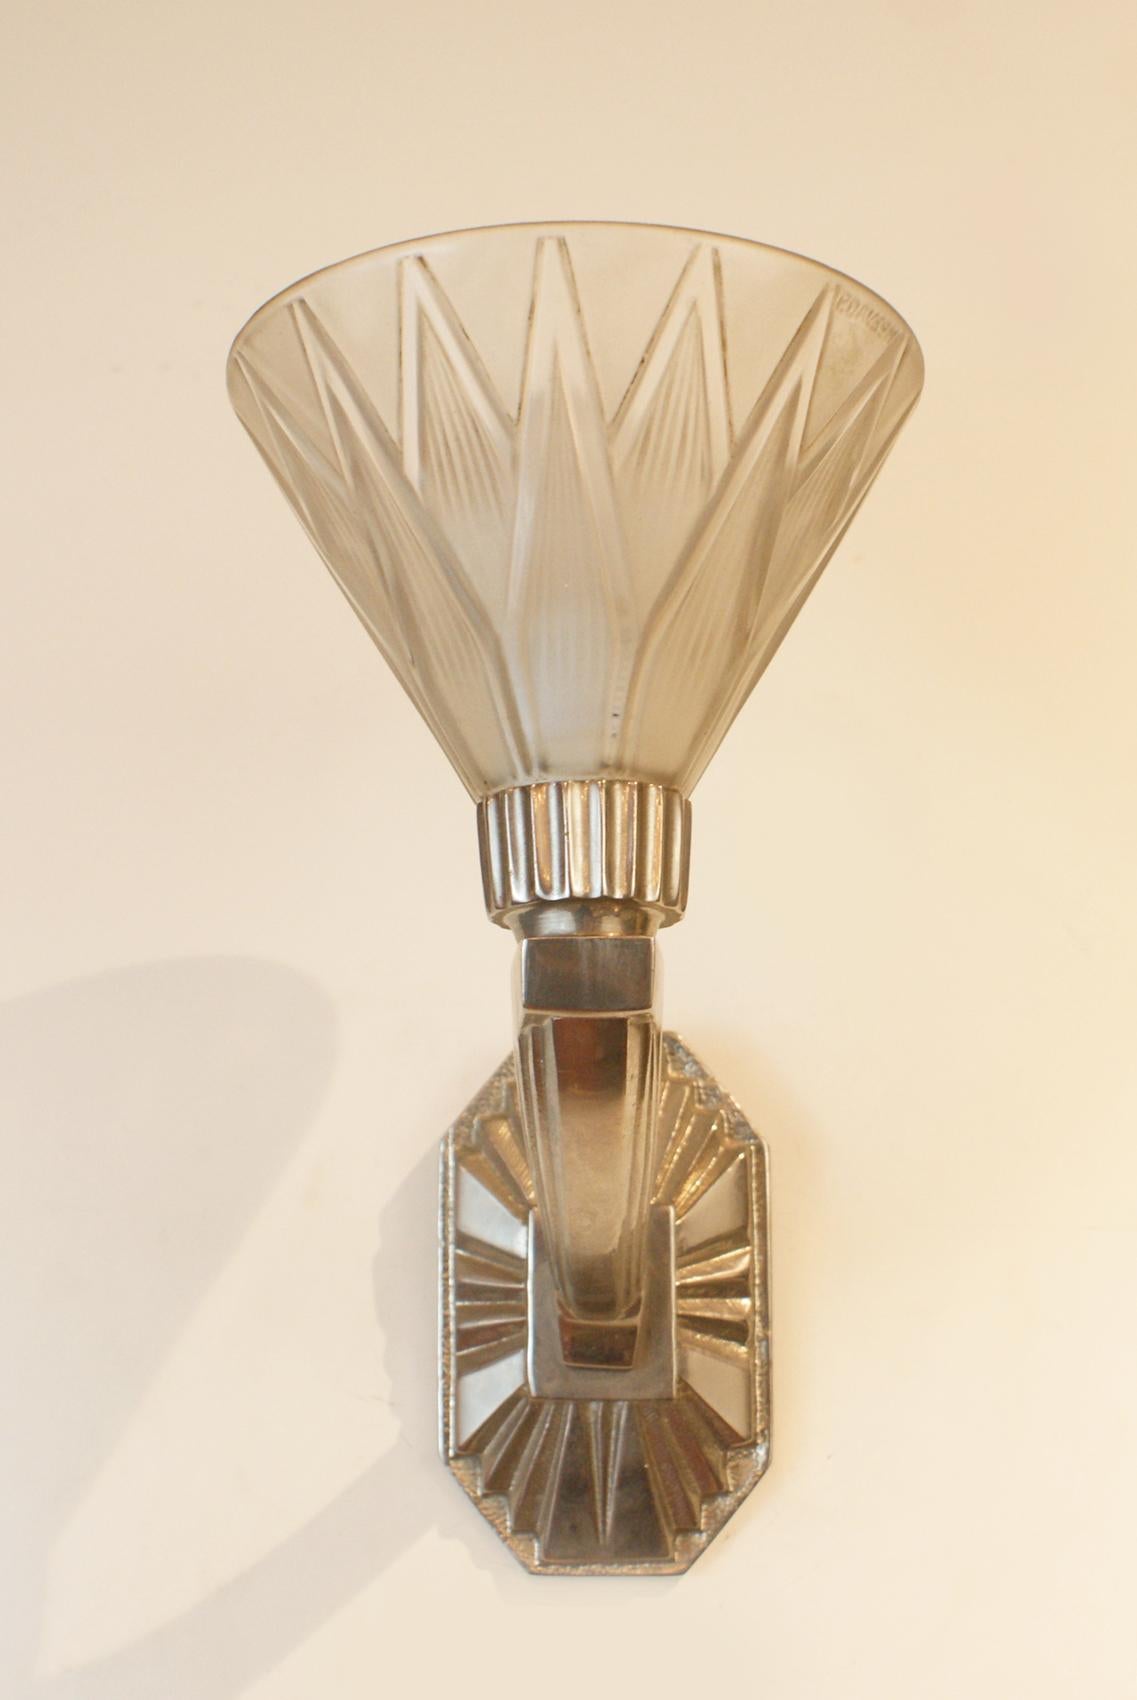 Frosted Charming Pair of Art Deco Wall Sconces signed P. D’avesn, France, circa 1930